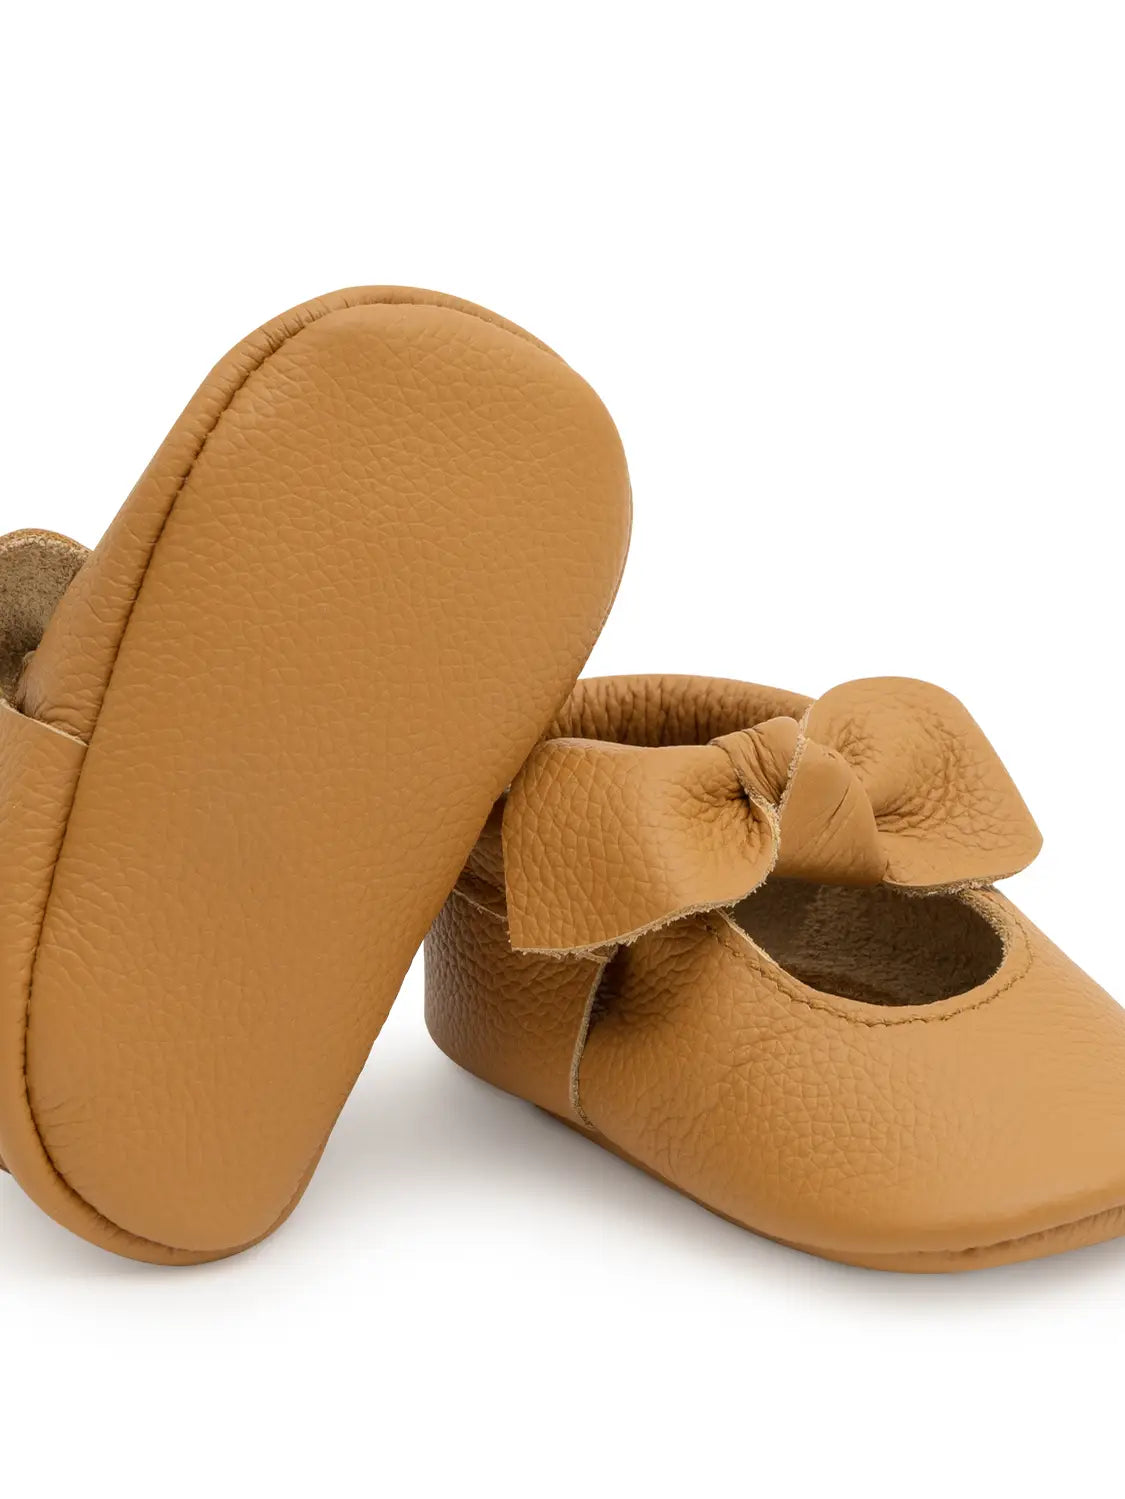 Knot Moccasins - Genuine Leather Baby Shoes Ginger